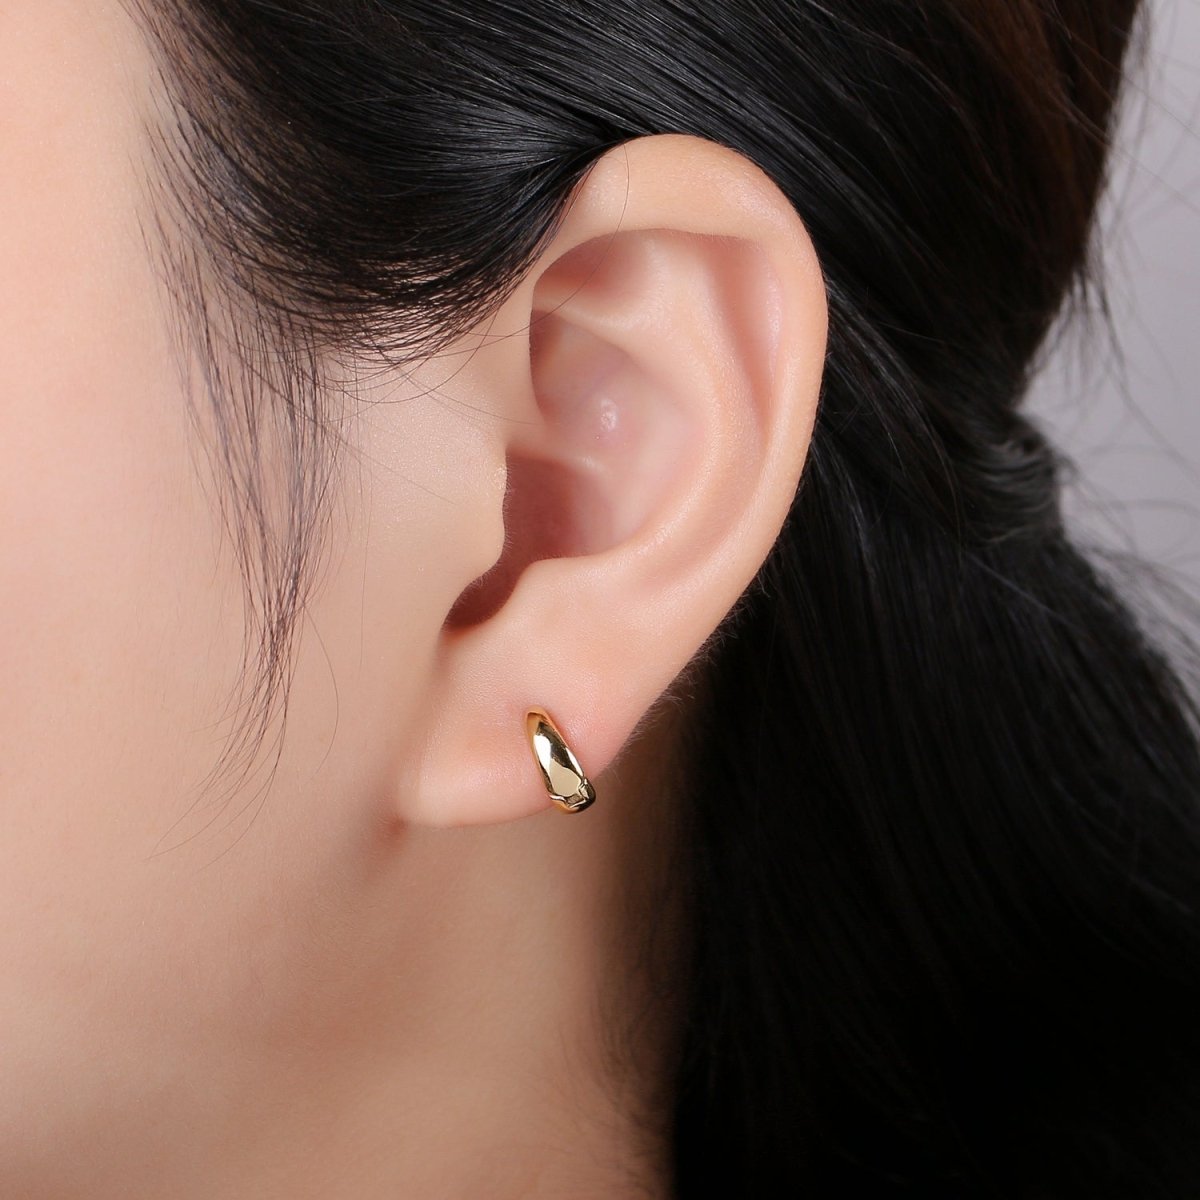 10mm Tiny gold hoops, Small Dainty hoops, Dainty earrings,Huggie earrings, Small hoops, Mini hoops gold,Gold hoops, Minimalist earring Q-238 - DLUXCA